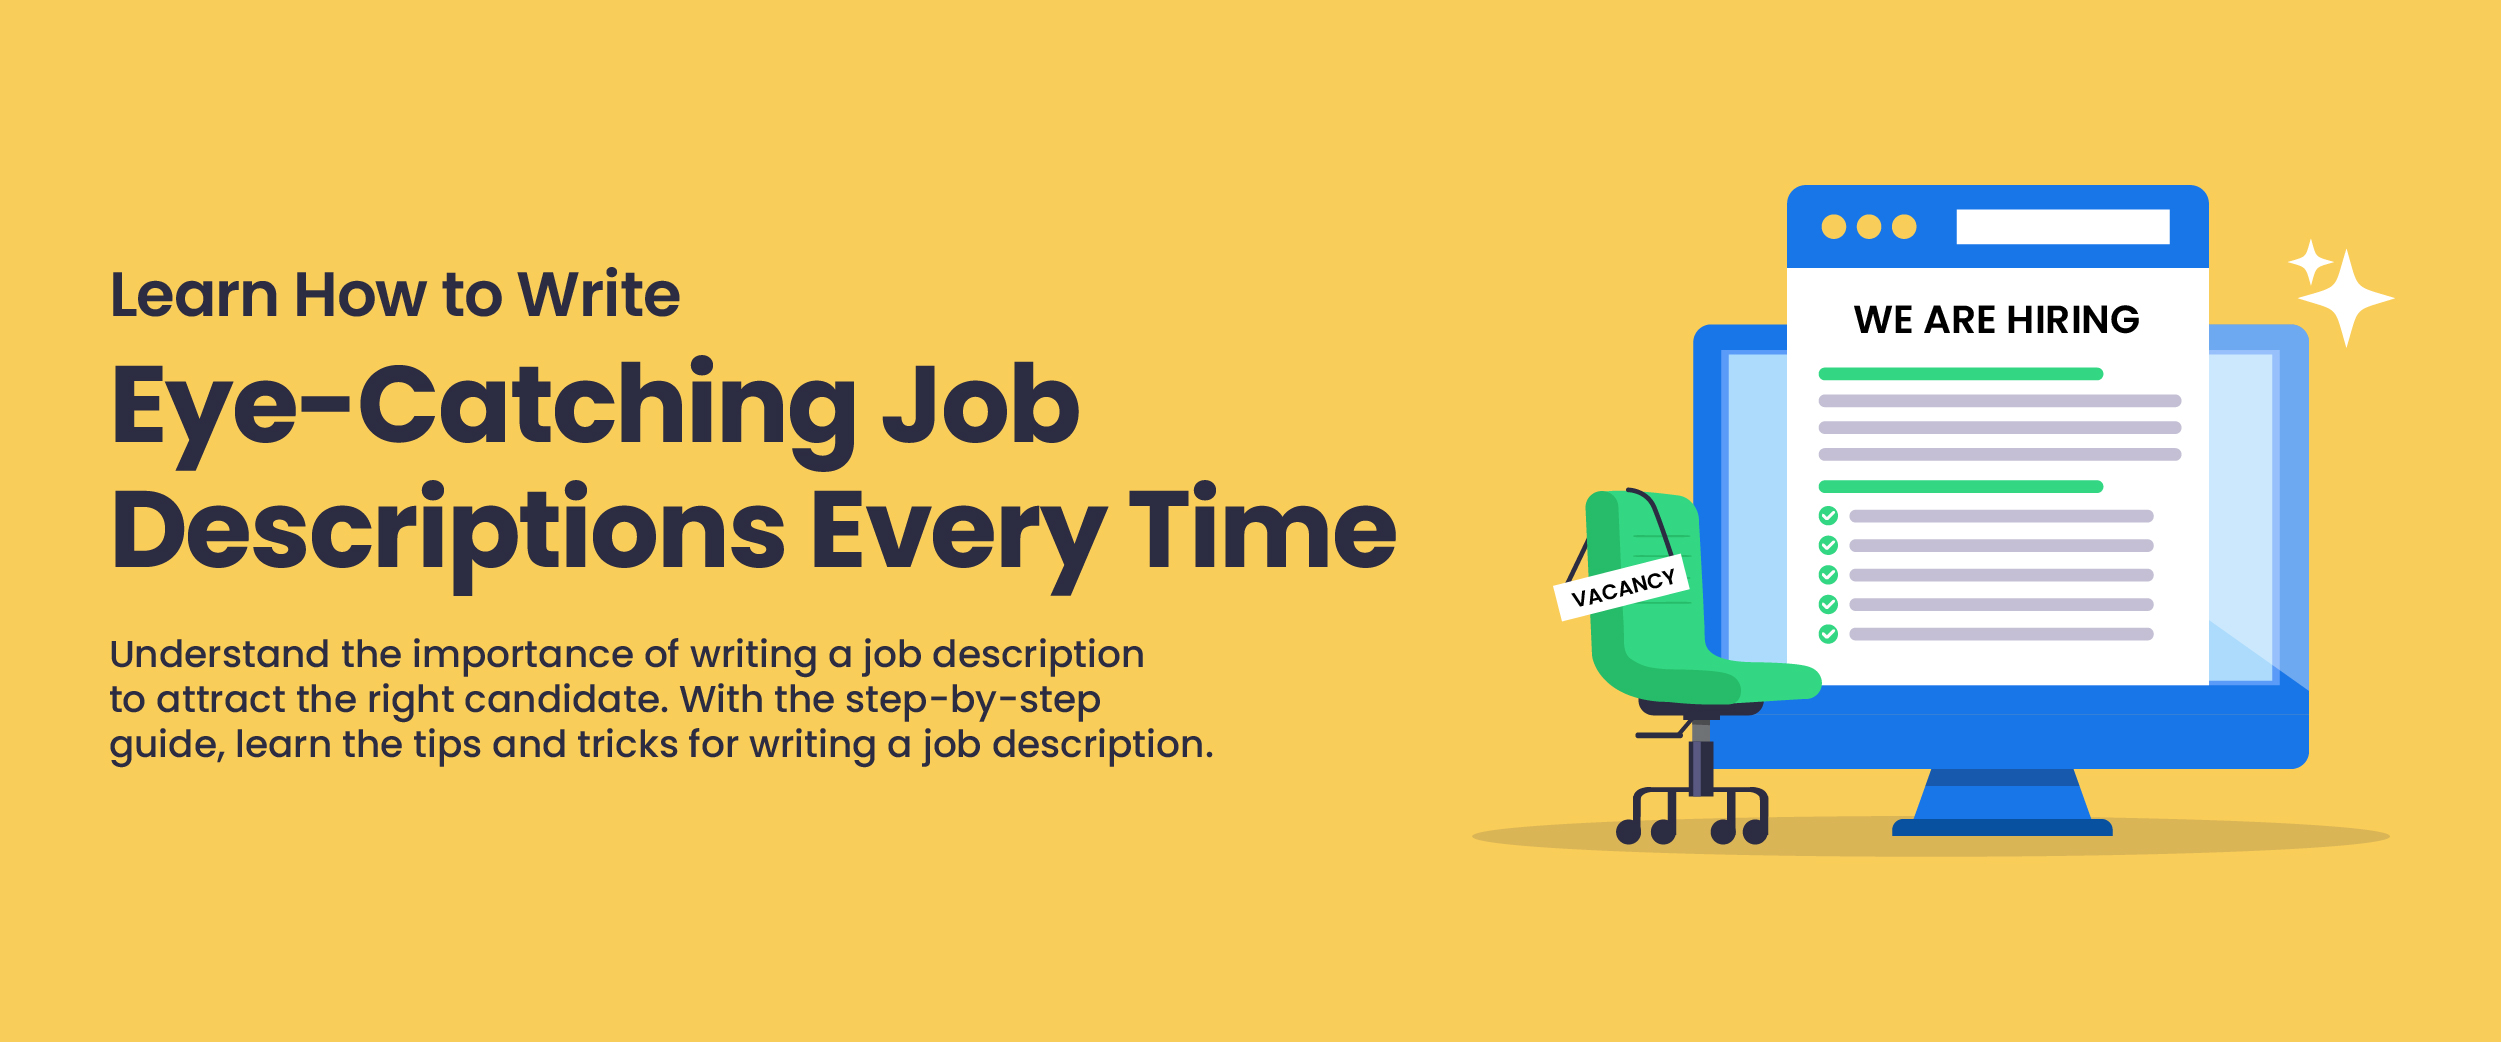 Learn How to Write Eye-Catching Job Descriptions Every Time